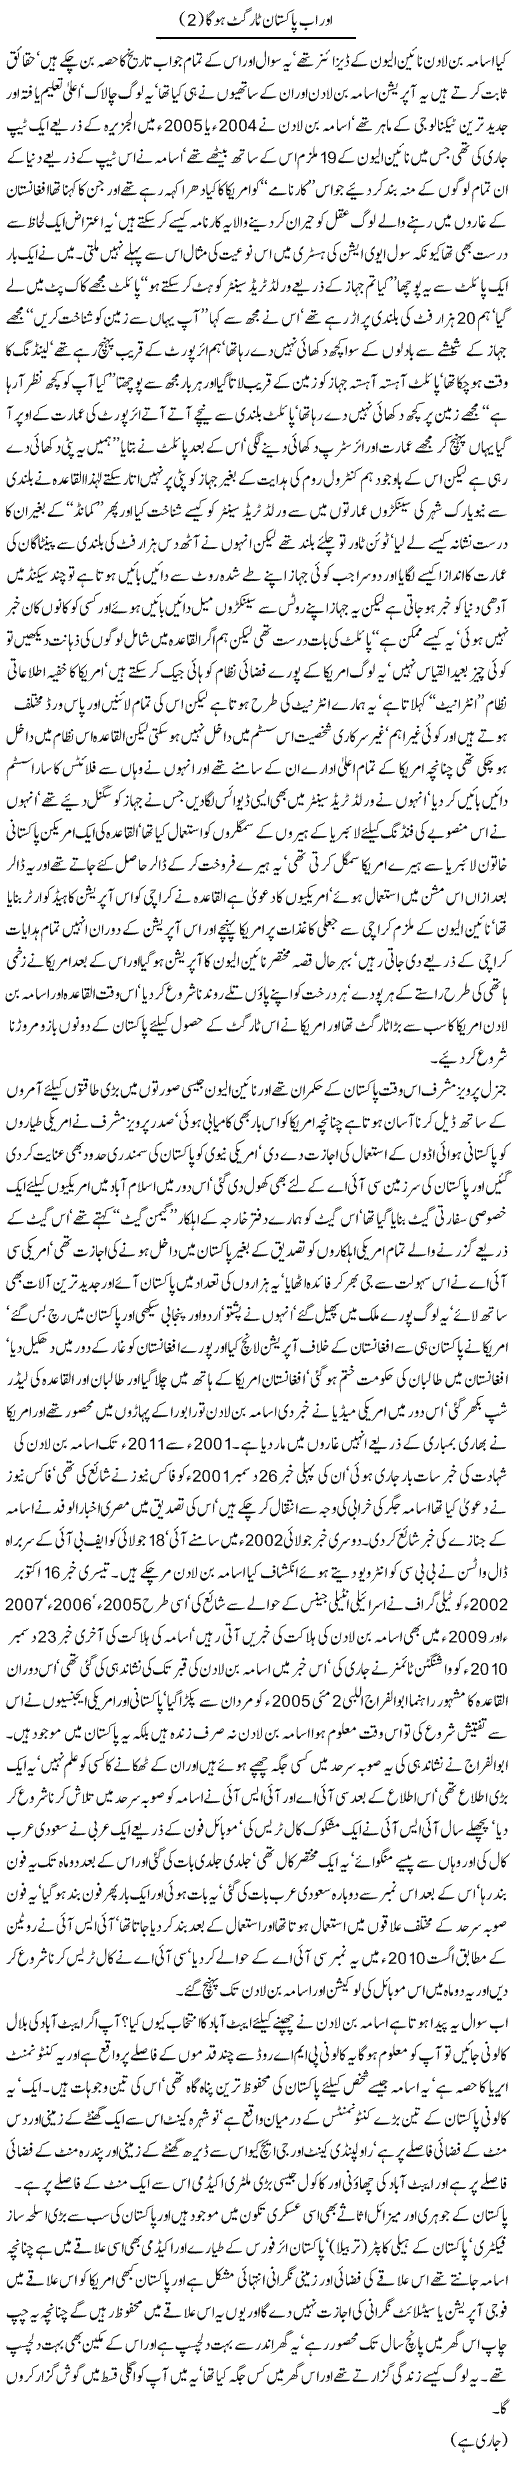 Now Pakistan Is Target Express Column Javed Chaudhry 6 May 2011